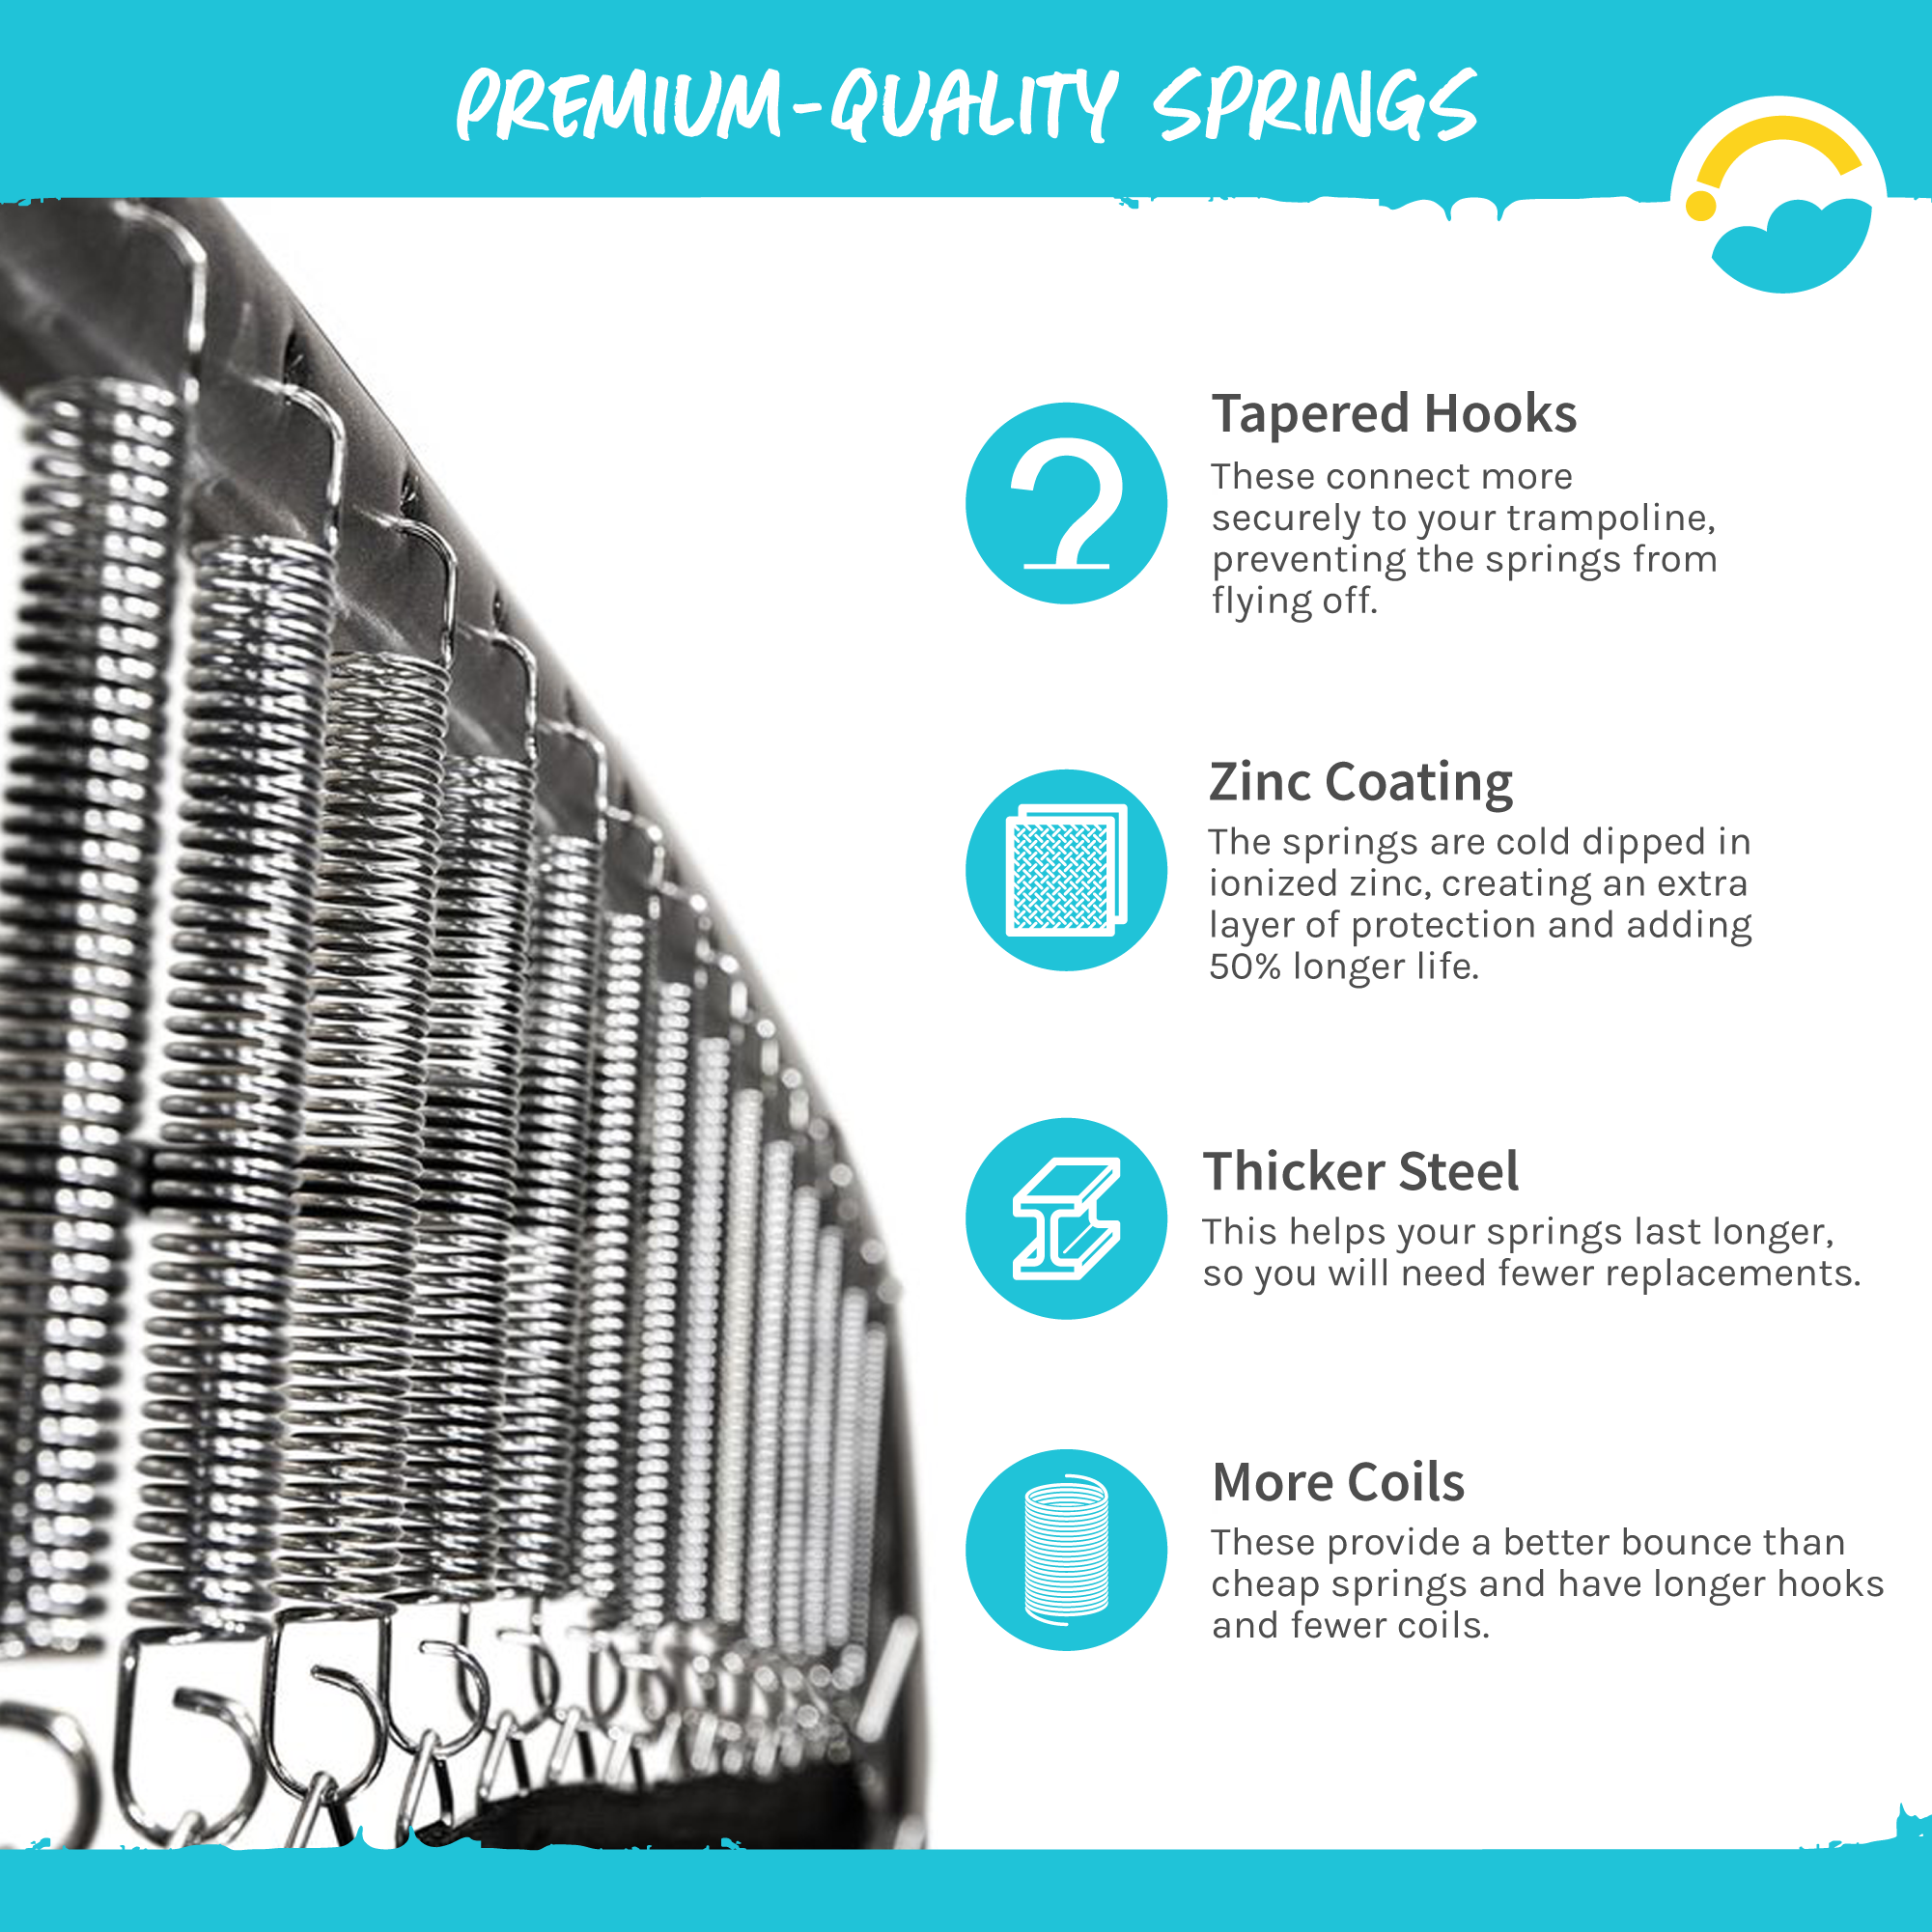 Premium-Quality Springs: Tapered Hooks, Zinc Coating, Thicker Steel, More Coils.